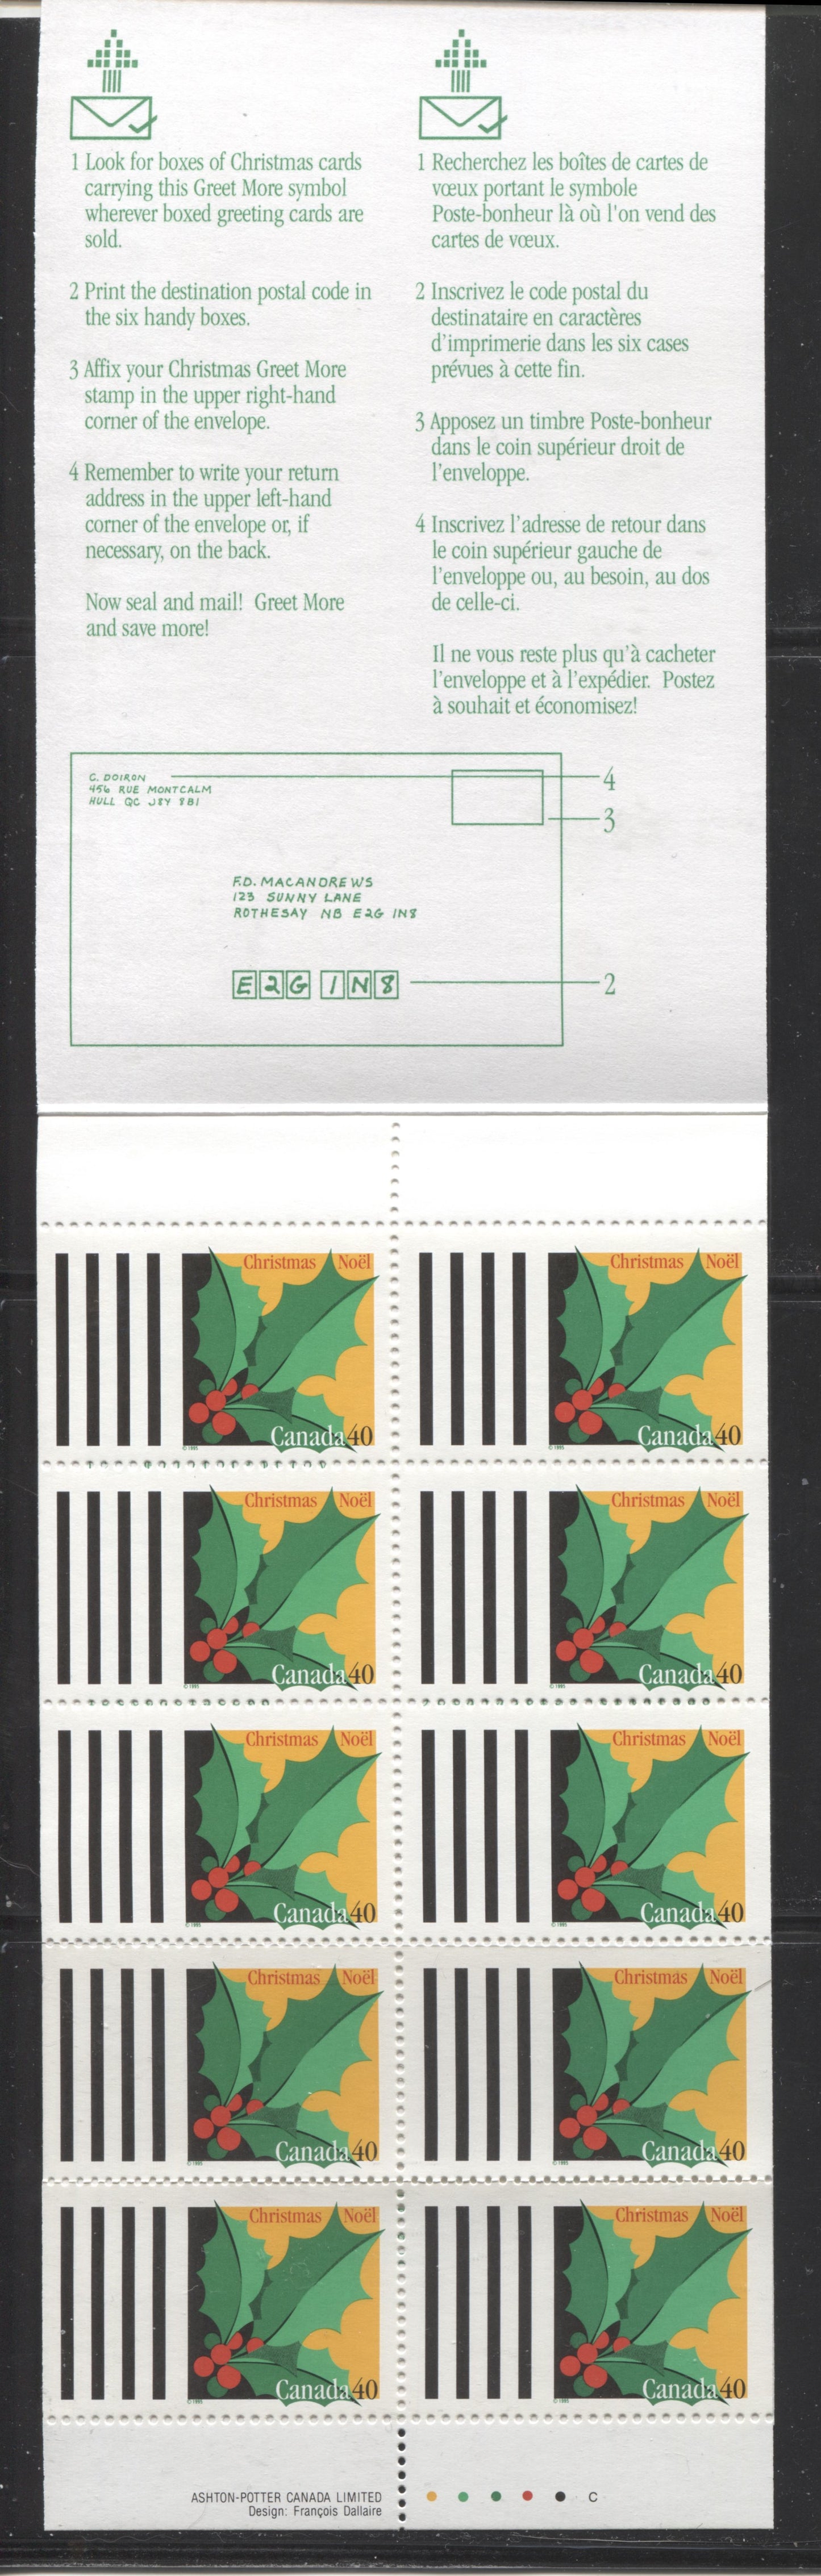 Canada #BK186a-b 1995 Christmas Issue, Complete $4 Booklet, Coated Papers Paper, Dead Paper, 4 mm GT-4 Tagging & 4 Additional Bars on Left Brixton Chrome 